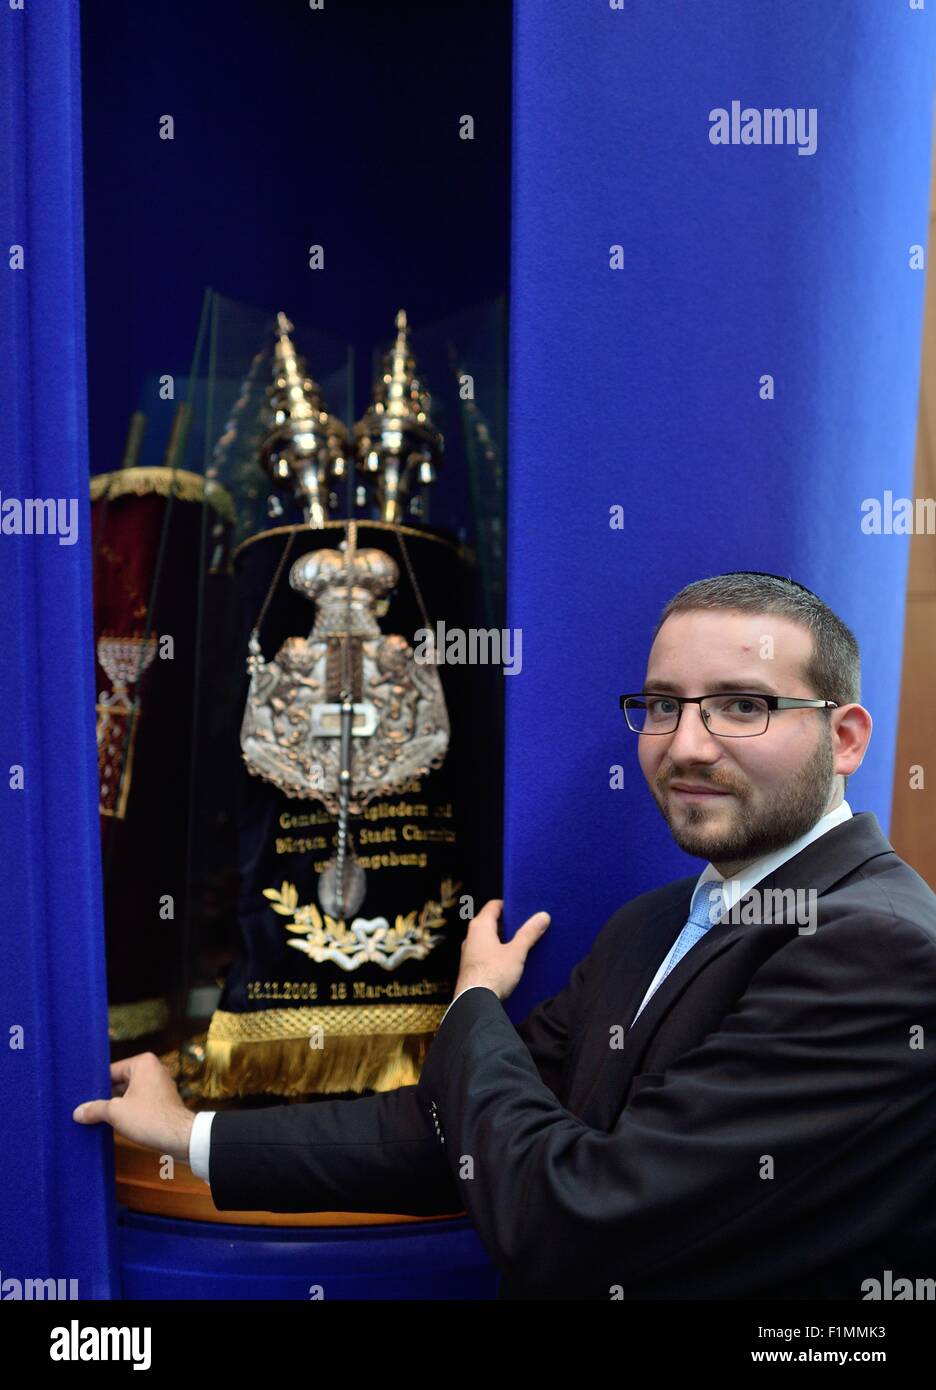 Chemnitz, Germany. 4th Sep, 2015. The prospective Rabbi of the Jewish community in Chemnitz, Jakov Pertsovsky, stands by the Torah at the new synagogue in Chemnitz, Germany, 4 September 2015. The 28-year-old will officially take office on Sunday 6 September, making him the city's first Rabbi in 77 years. PHOTO: HENDRIK SCHMIDT/DPA/Alamy Live News Stock Photo